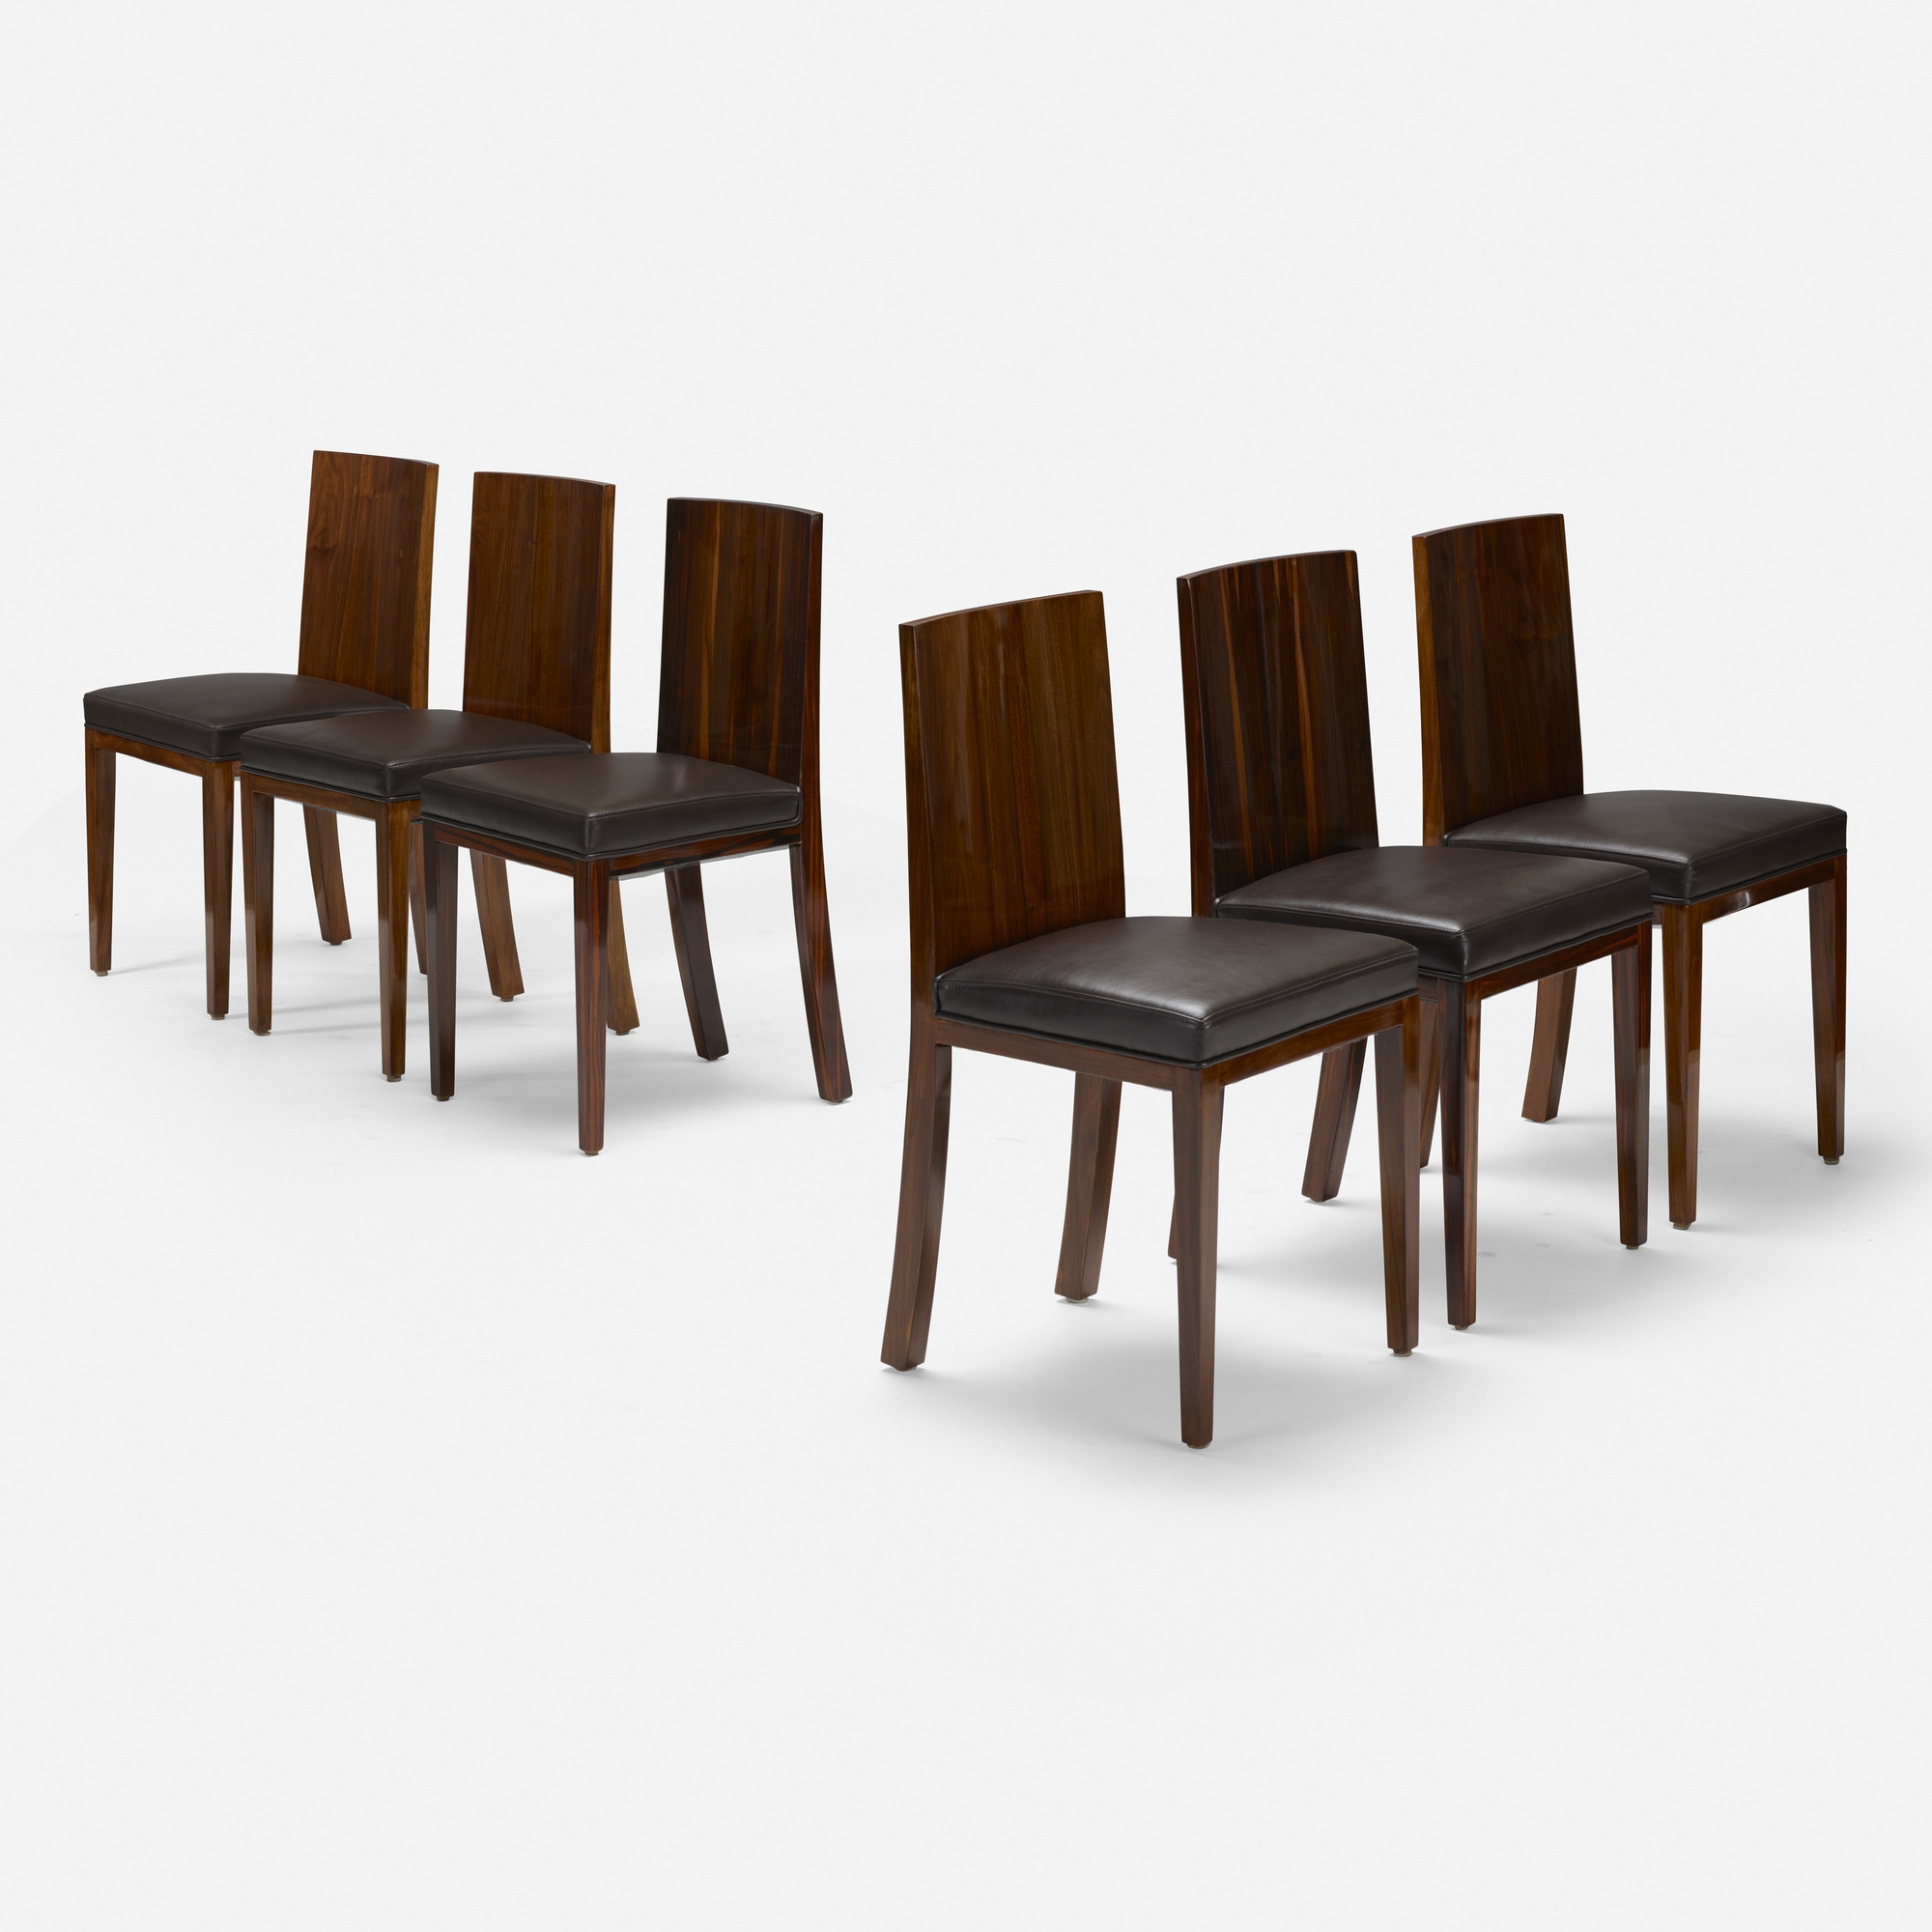 Dining chairs for the Royalton Hotel, set of six by Philippe Starck, 1988